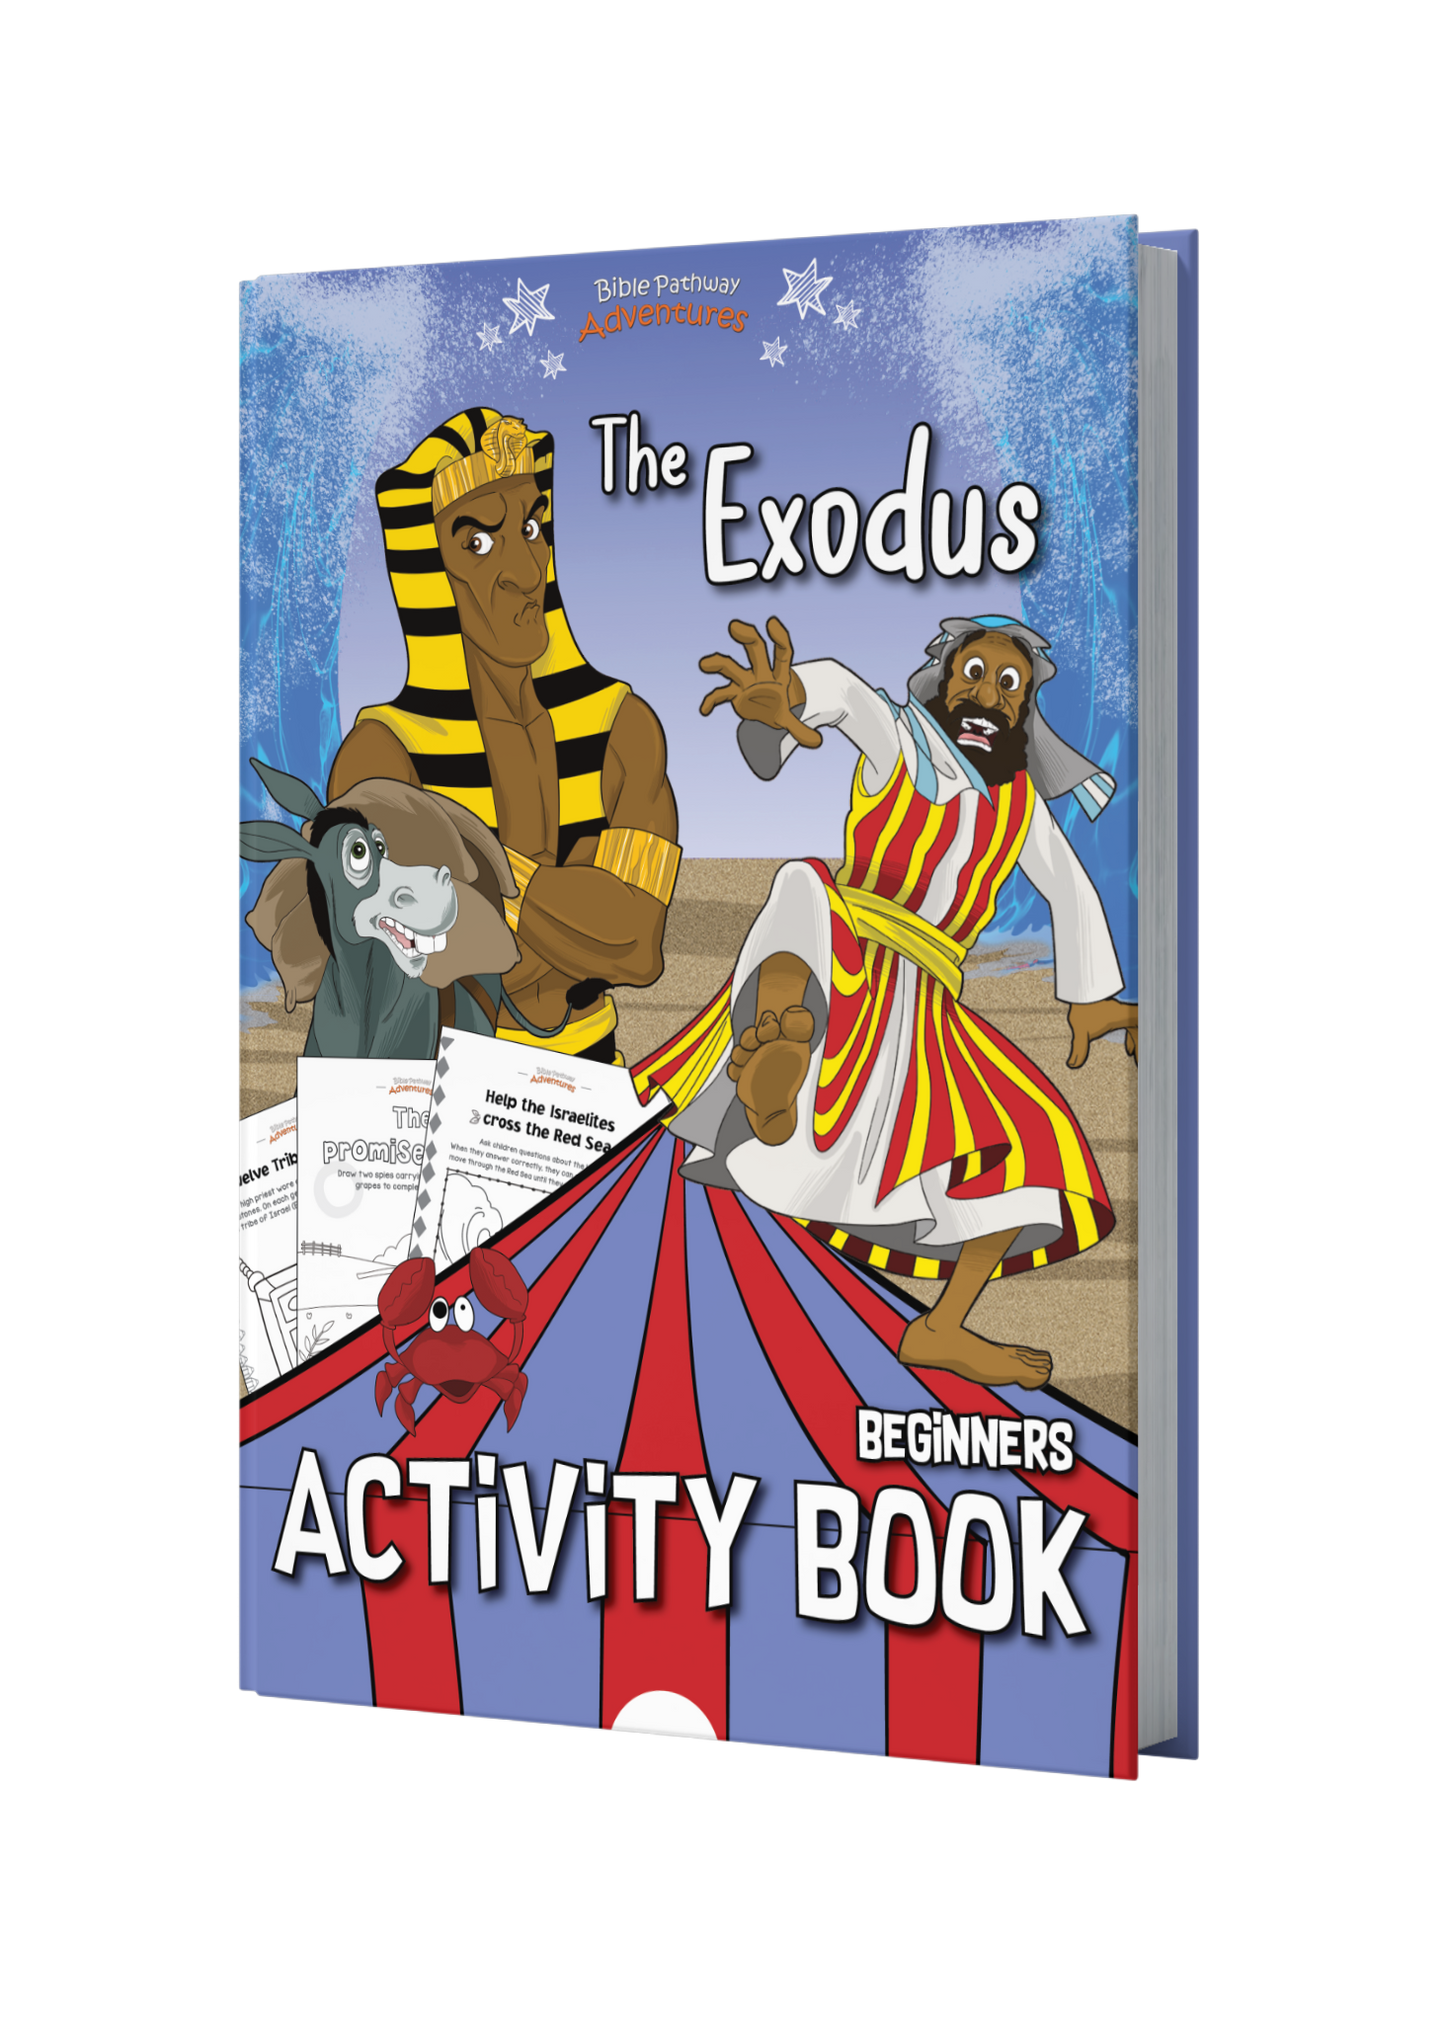 The Exodus Activity Book for Beginners (paperback)